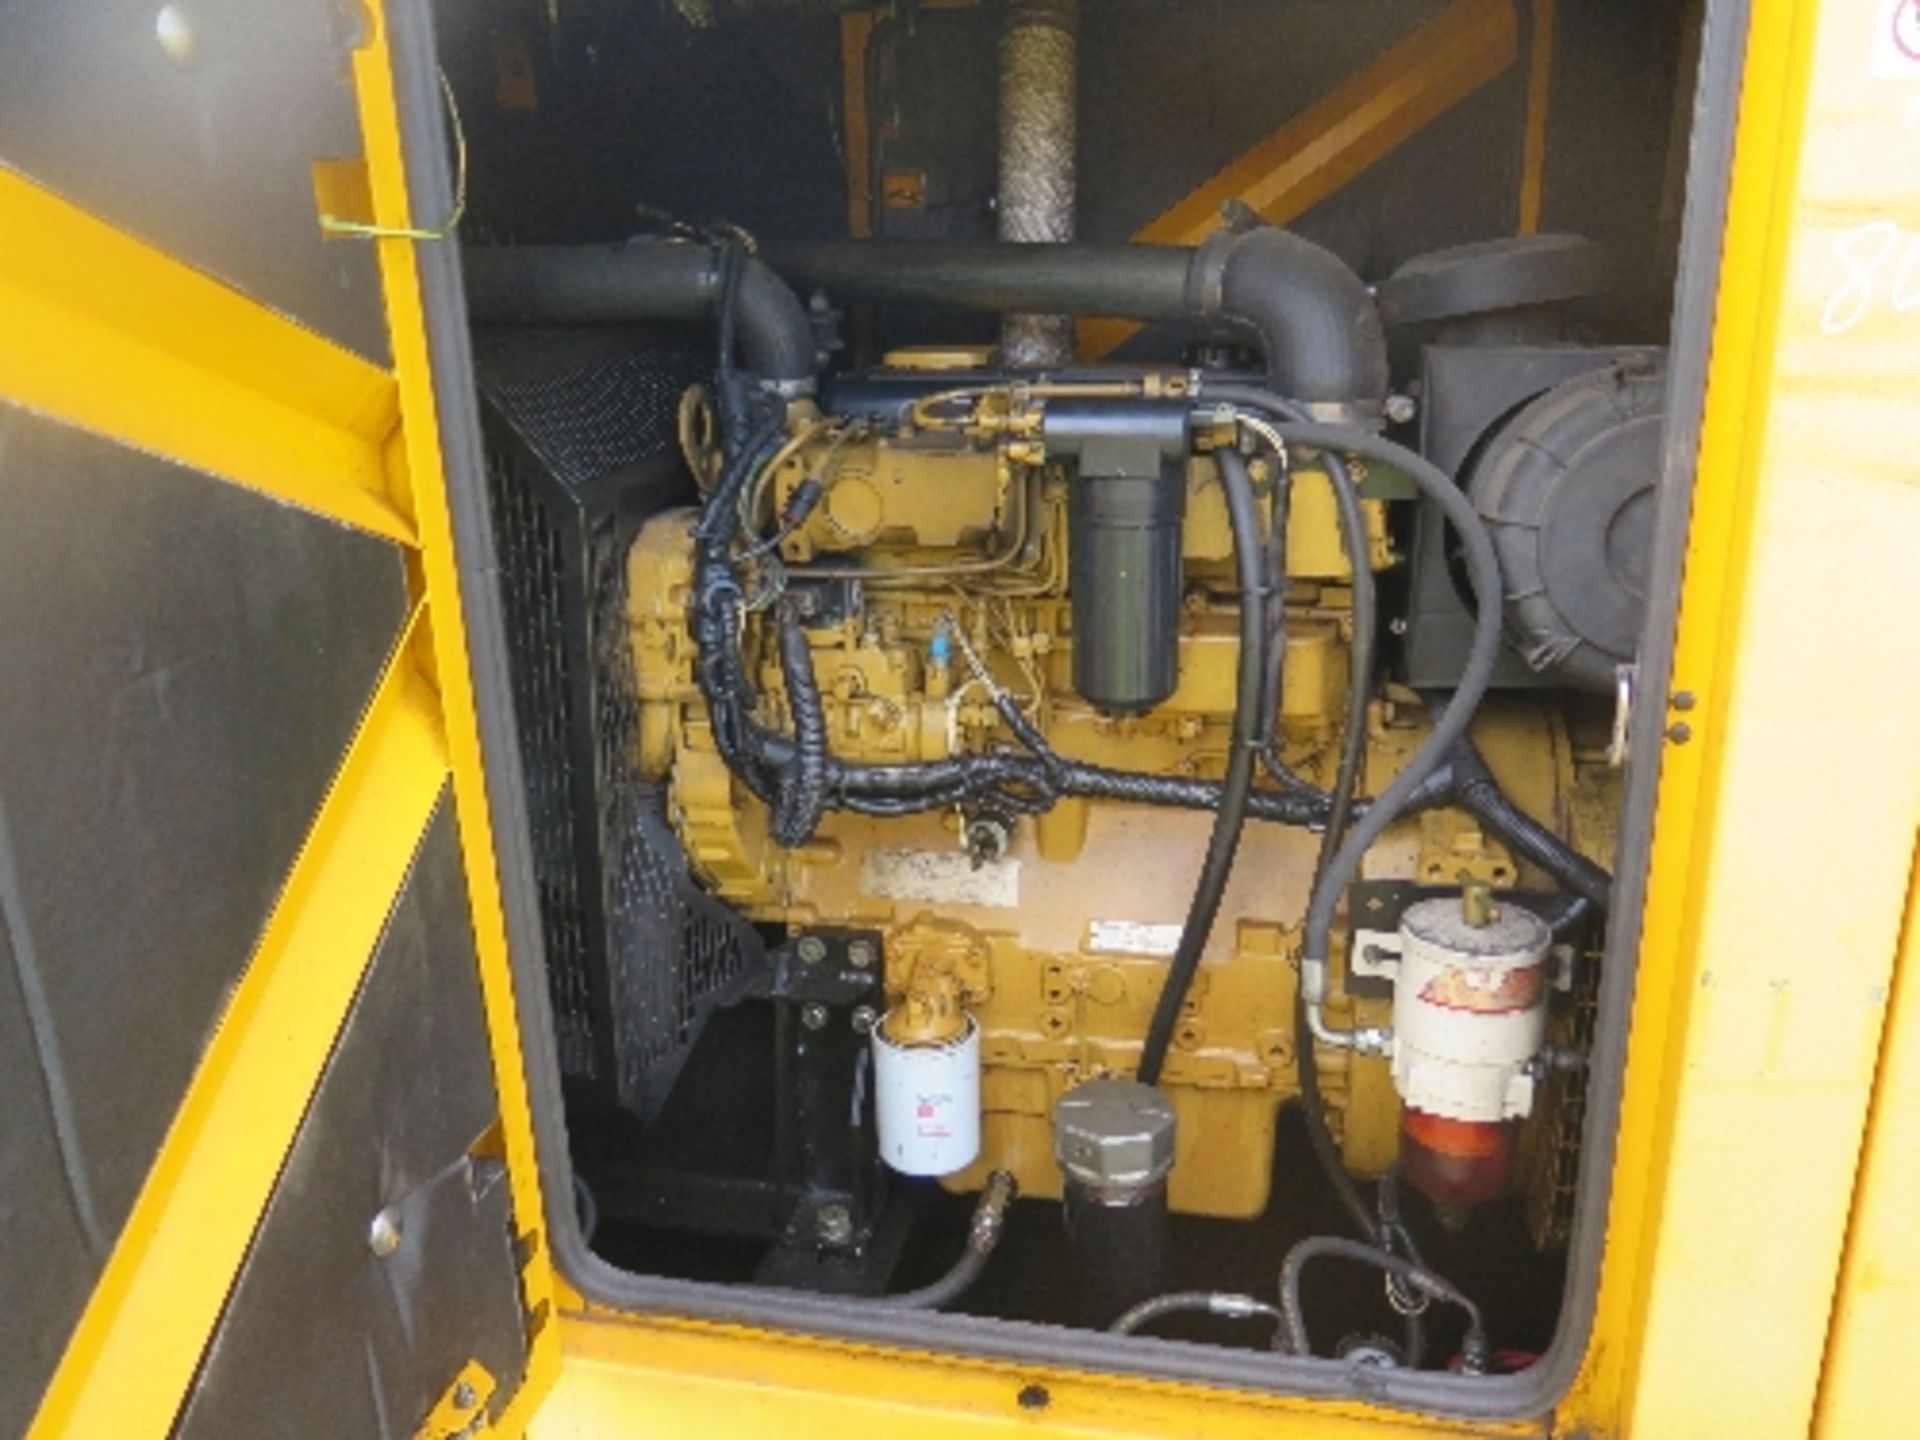 Caterpillar XQE80 generator 12997 hrs 5003857
PERKINS POWER - RUNS AND MAKES POWER
ALL LOTS are - Image 3 of 5